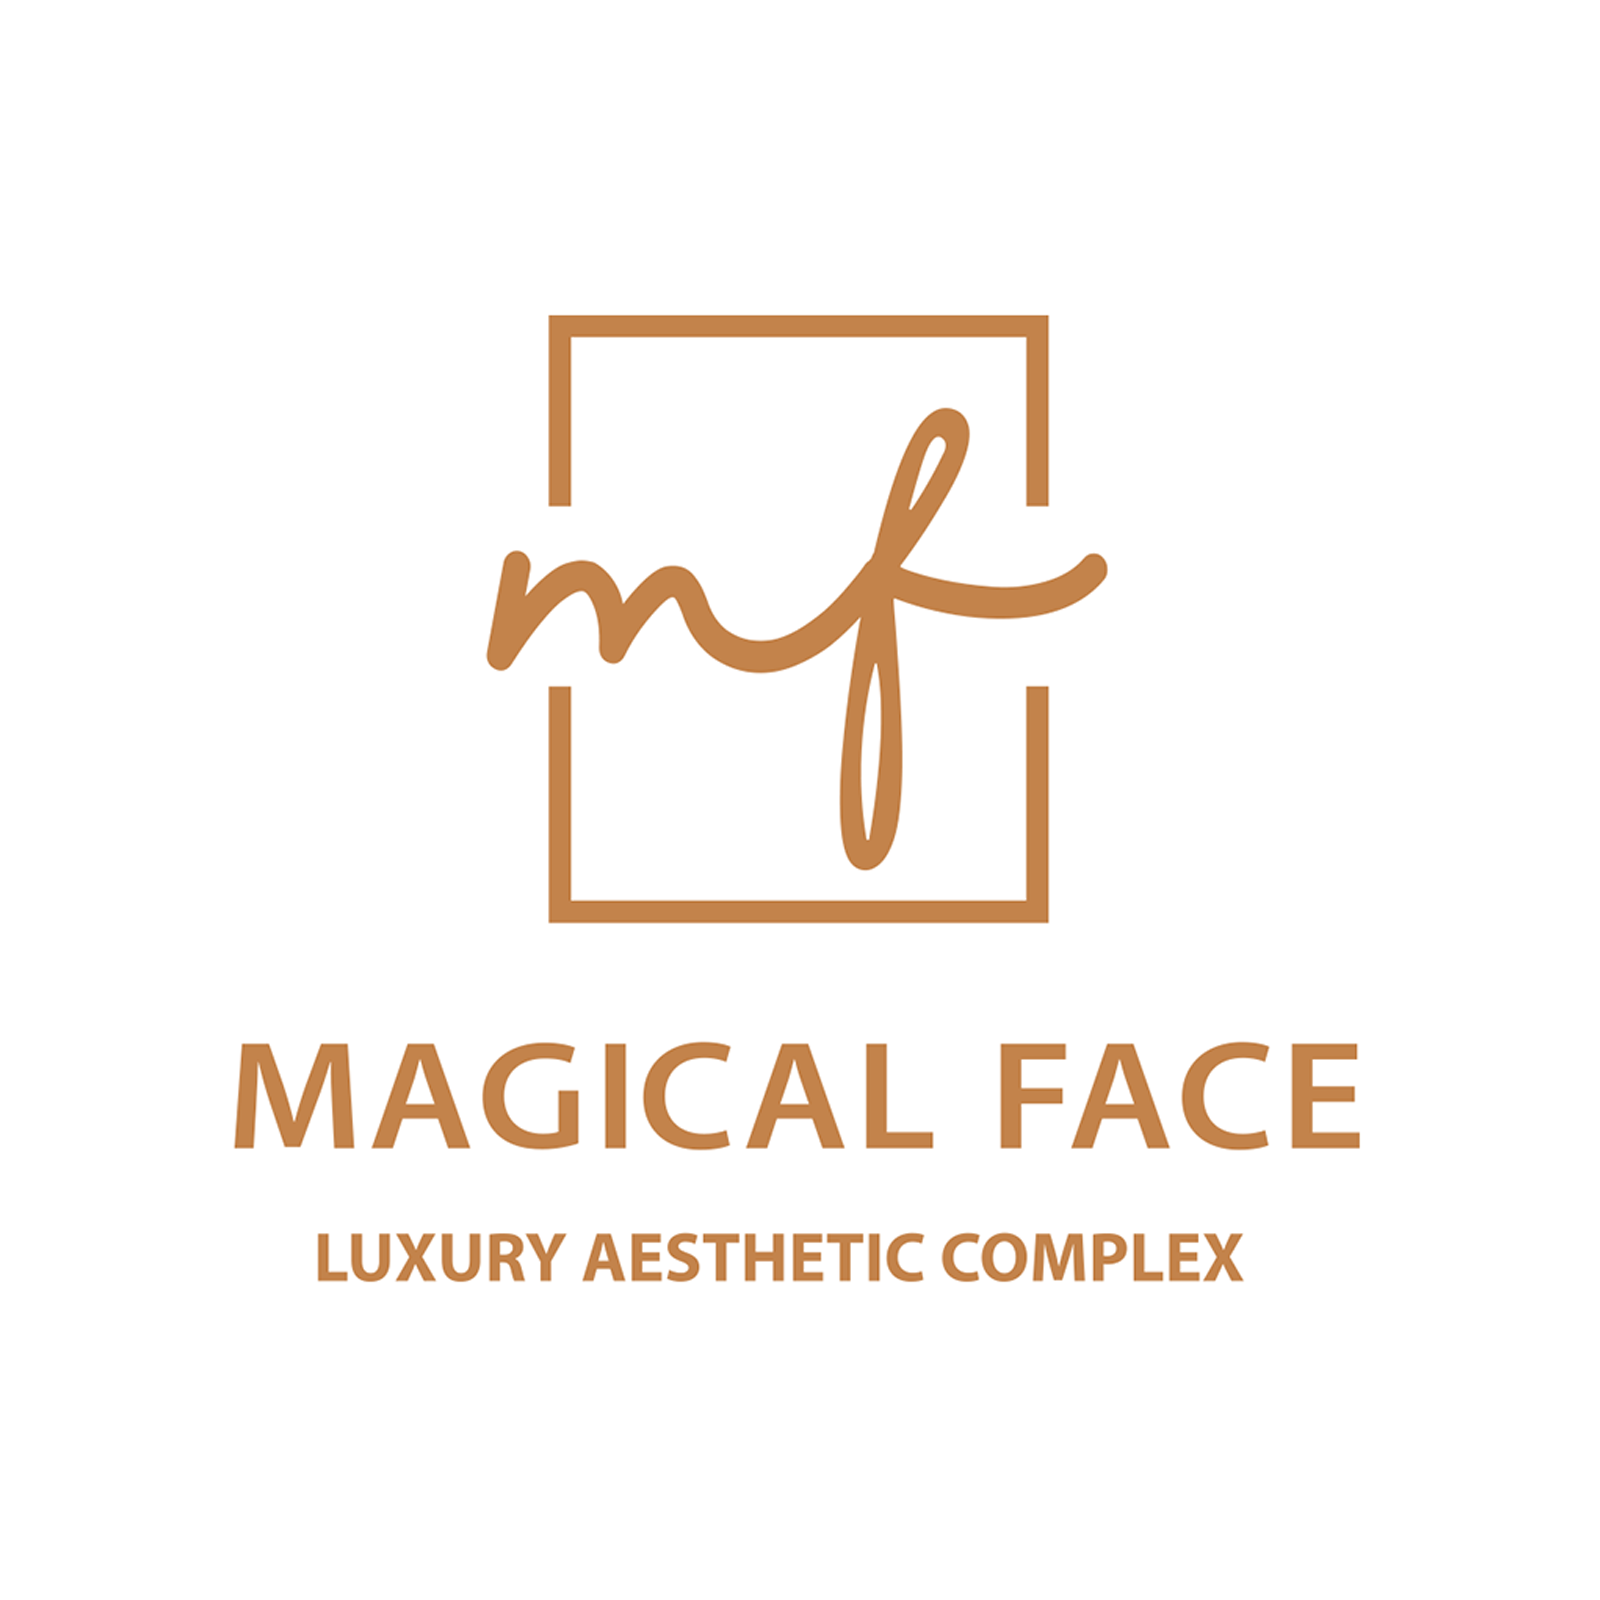 Magical Face Luxury Aesthetic Complex